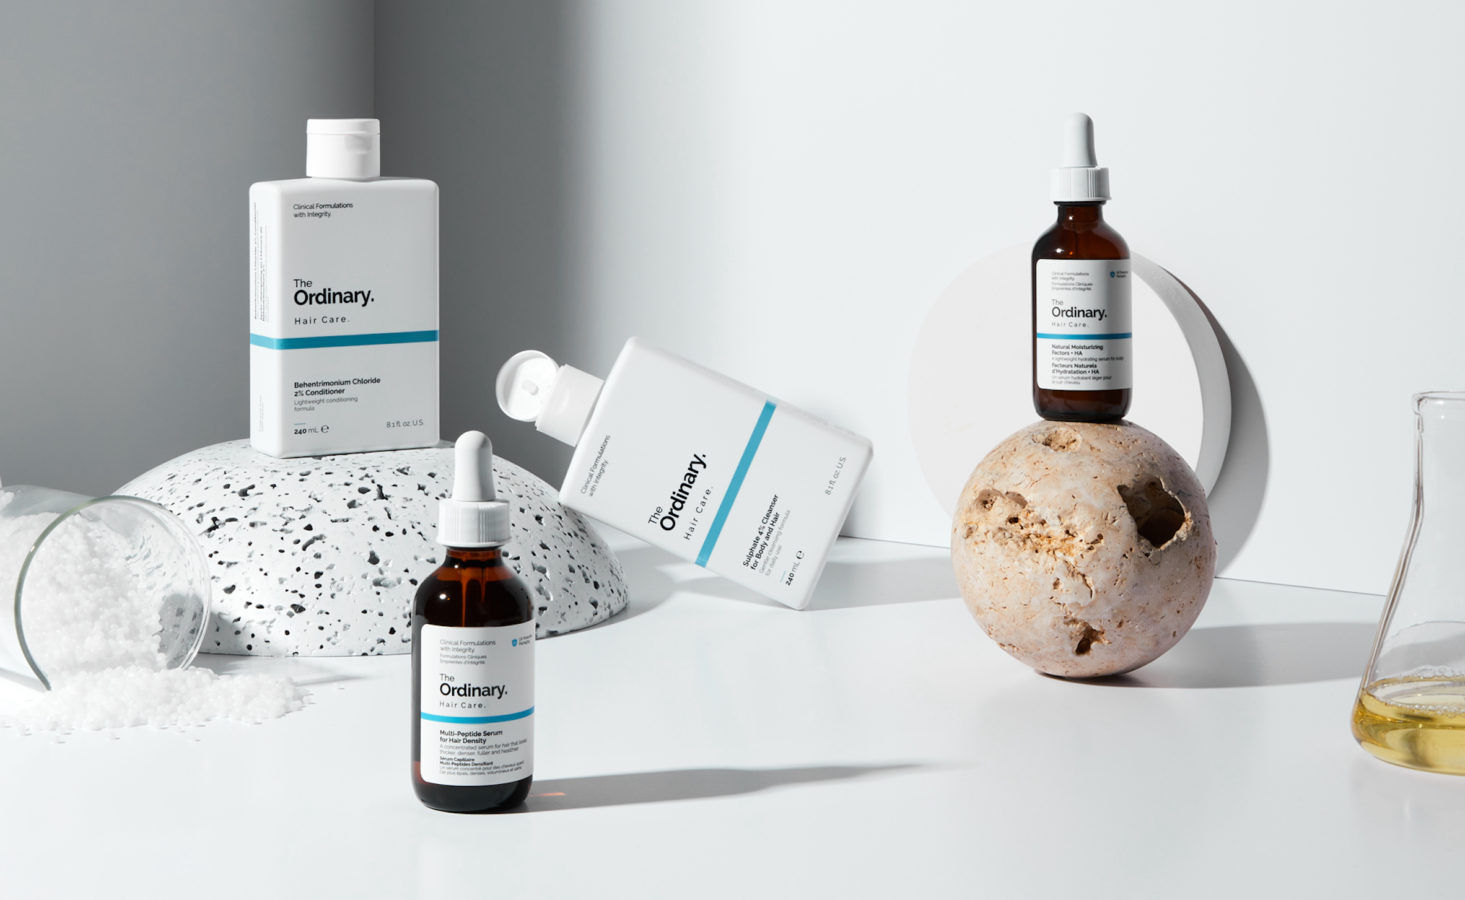 The Ordinary’s Hair Care: What to Know about Sulphates, Surfactants and More